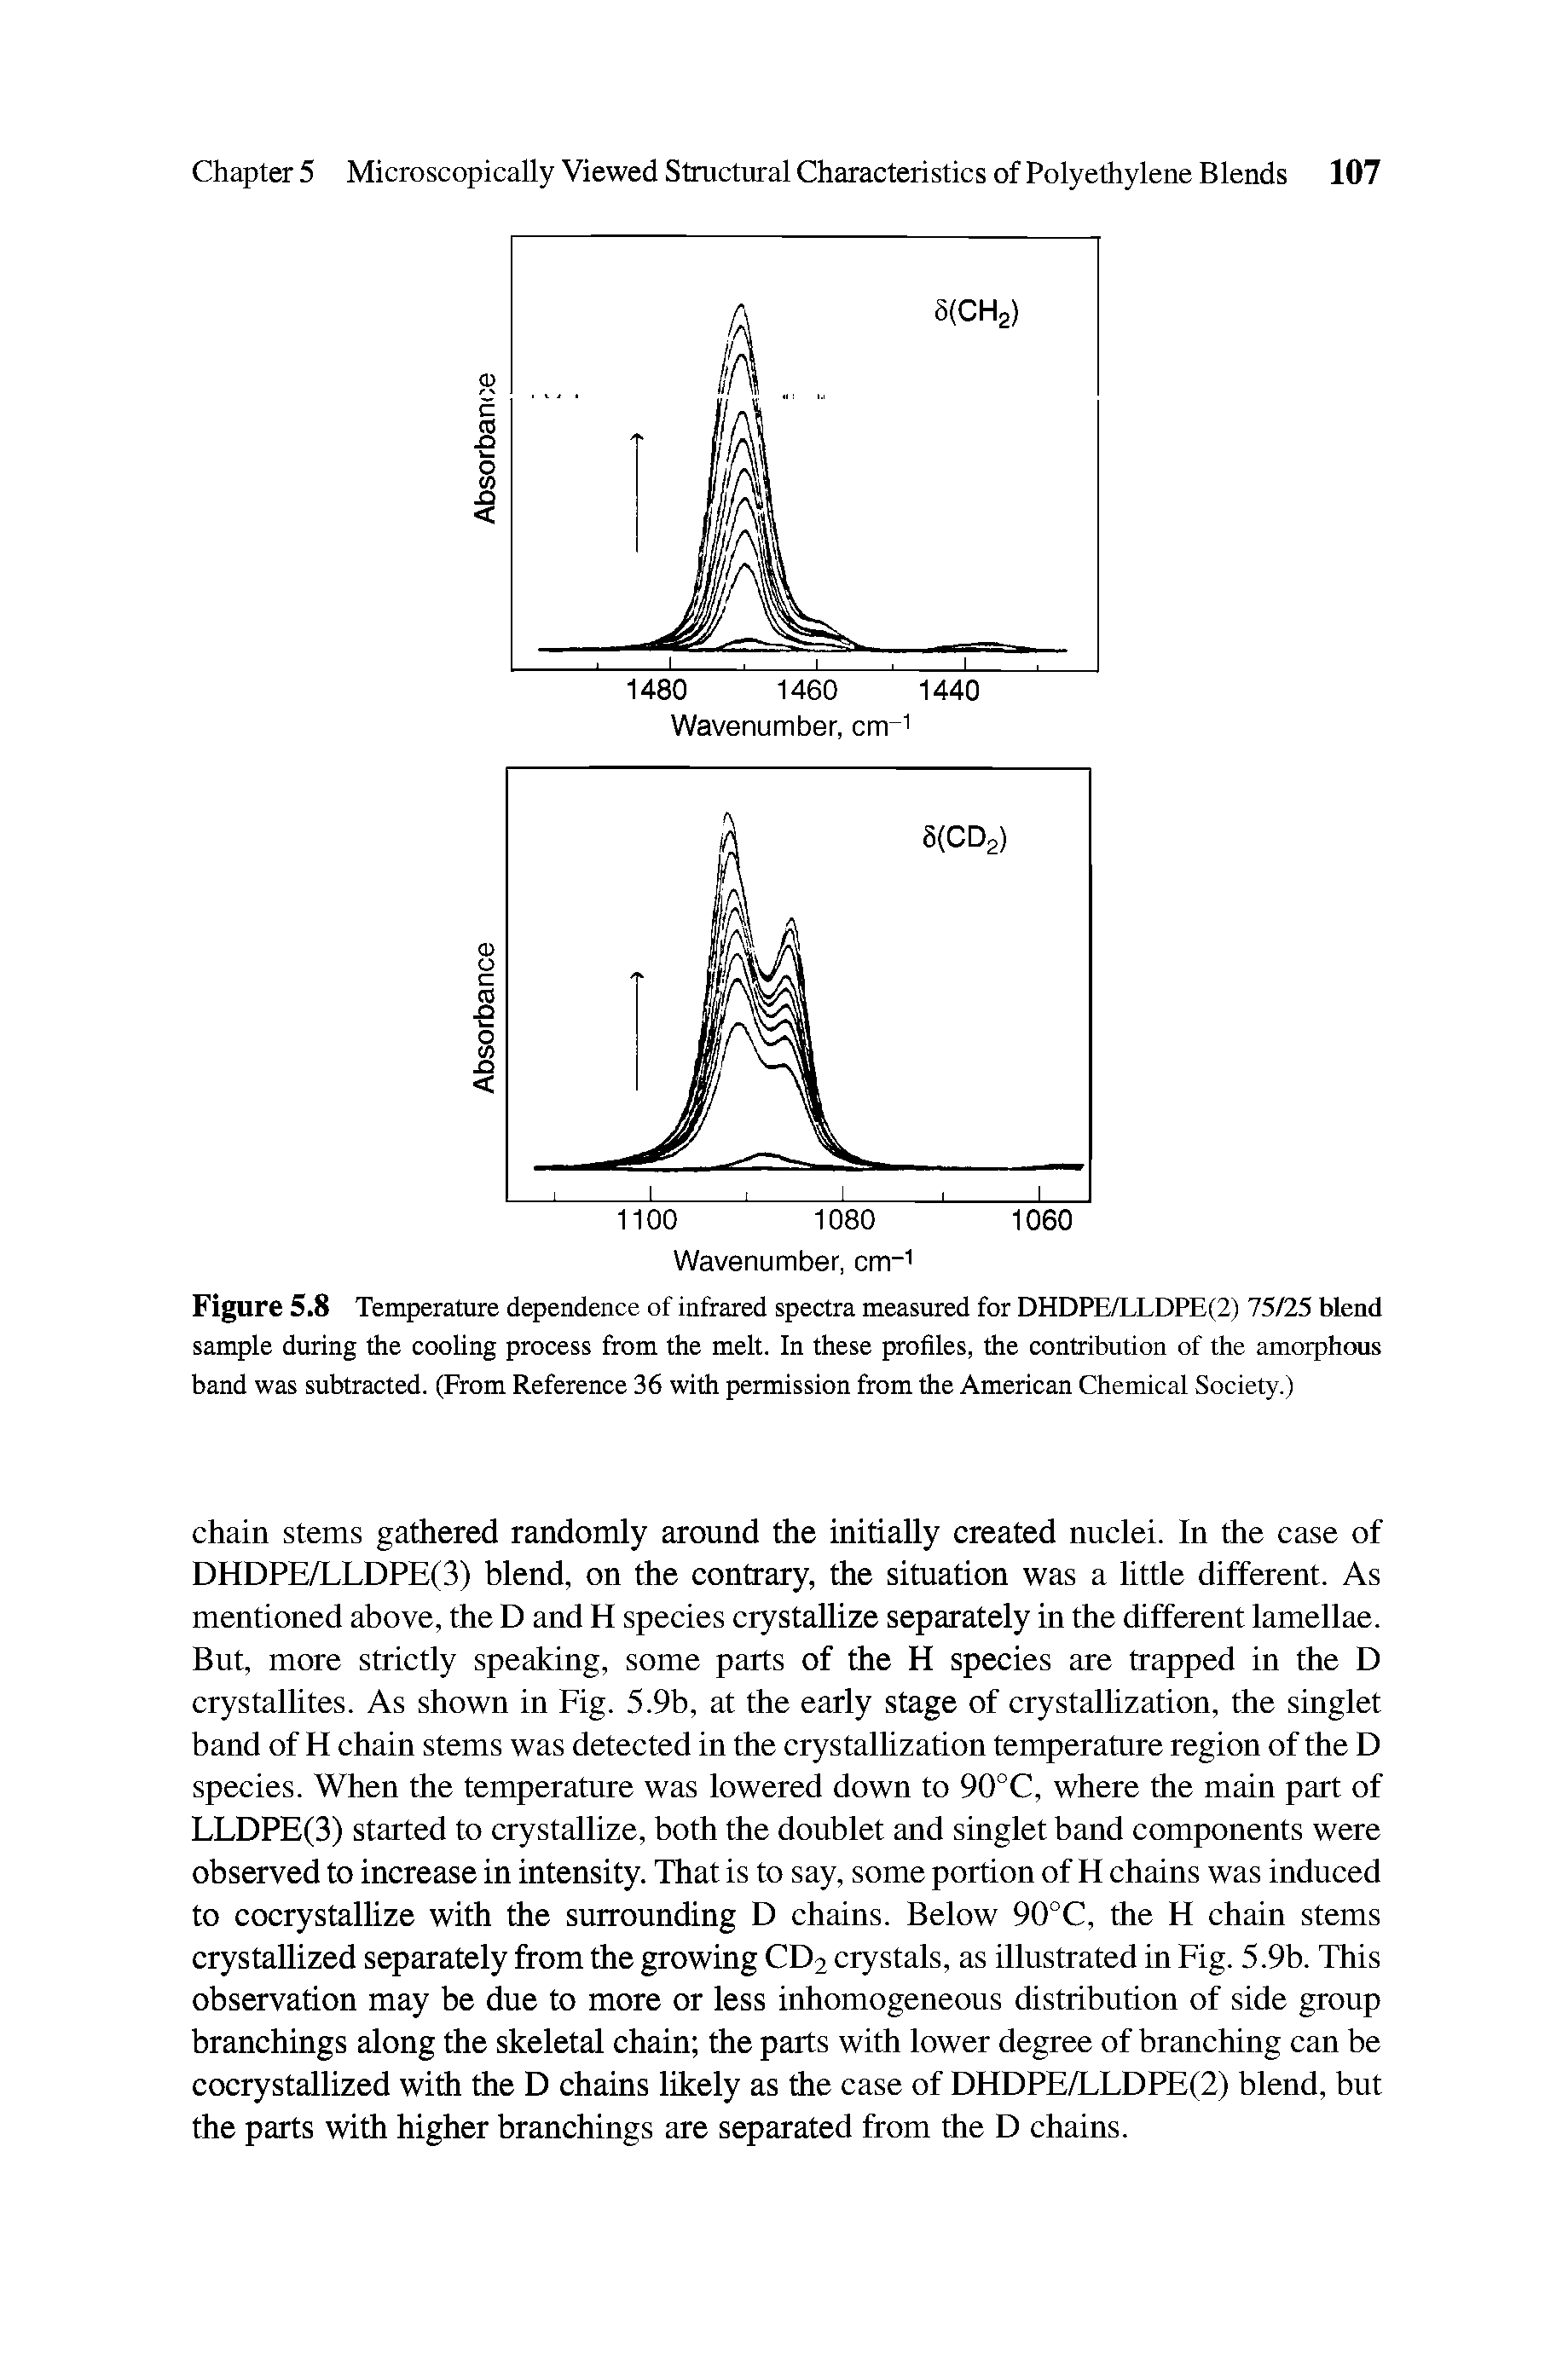 Figure 5.8 Temperature dependence of infrared spectra measured for DHDPE/LLDPE(2) 75/25 blend sample during the cooling process from the melt. In these profiles, the contribution of the amorphous band was subtracted. (From Reference 36 with permission from the American Chemical Society.)...